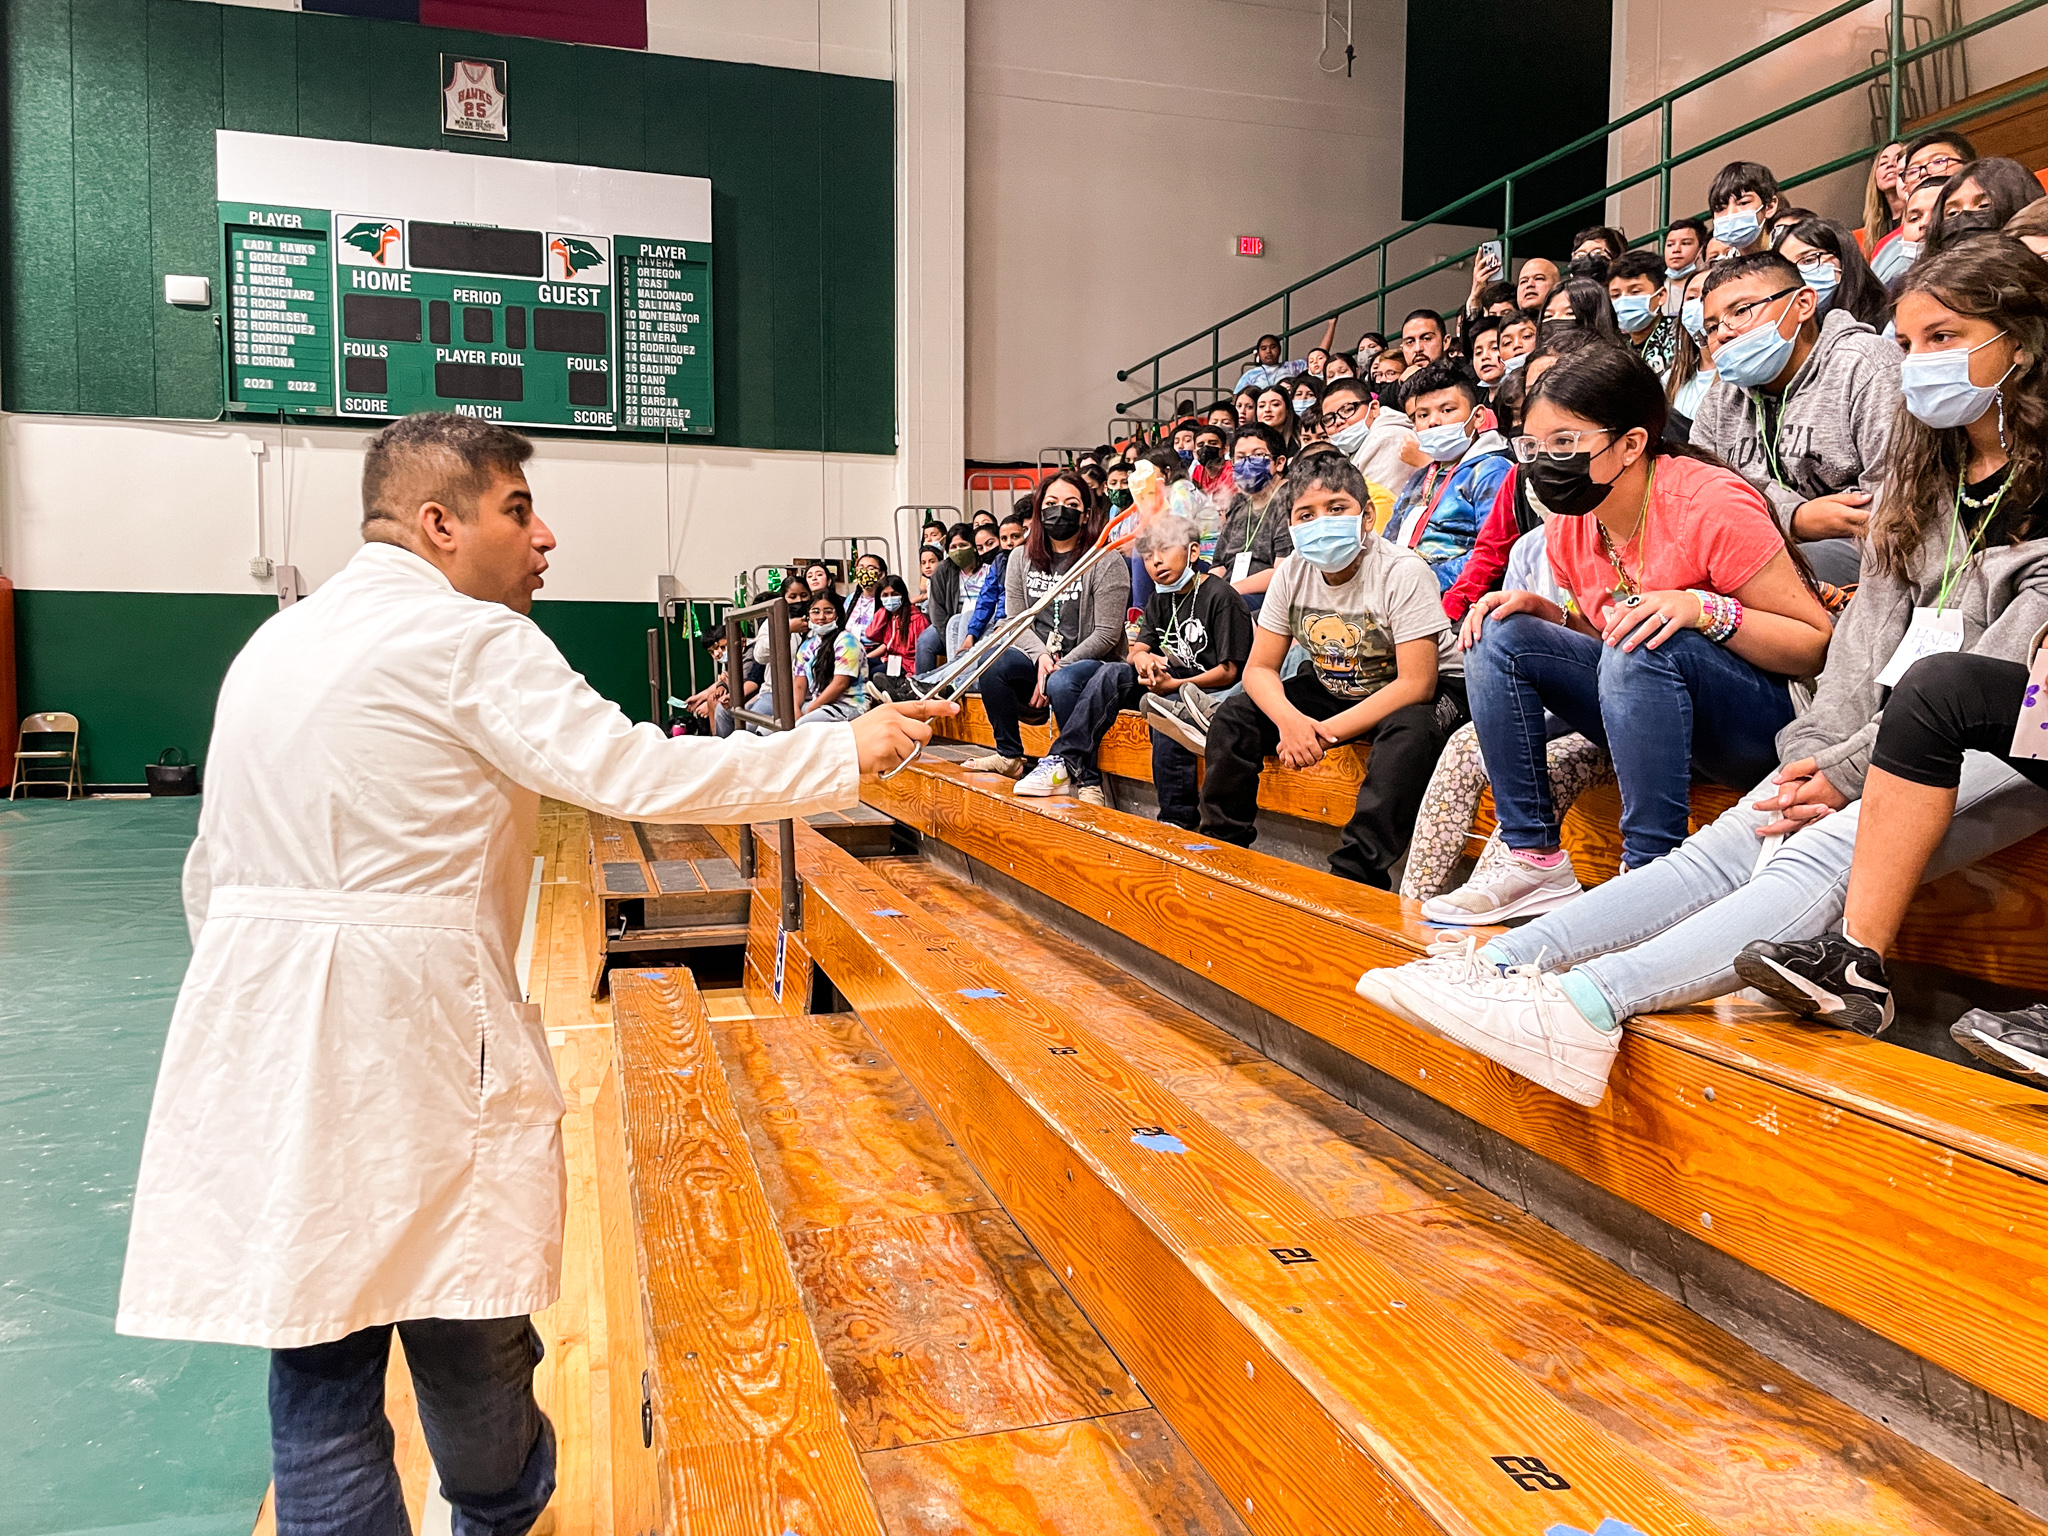 Fifth graders visit South for Science Day